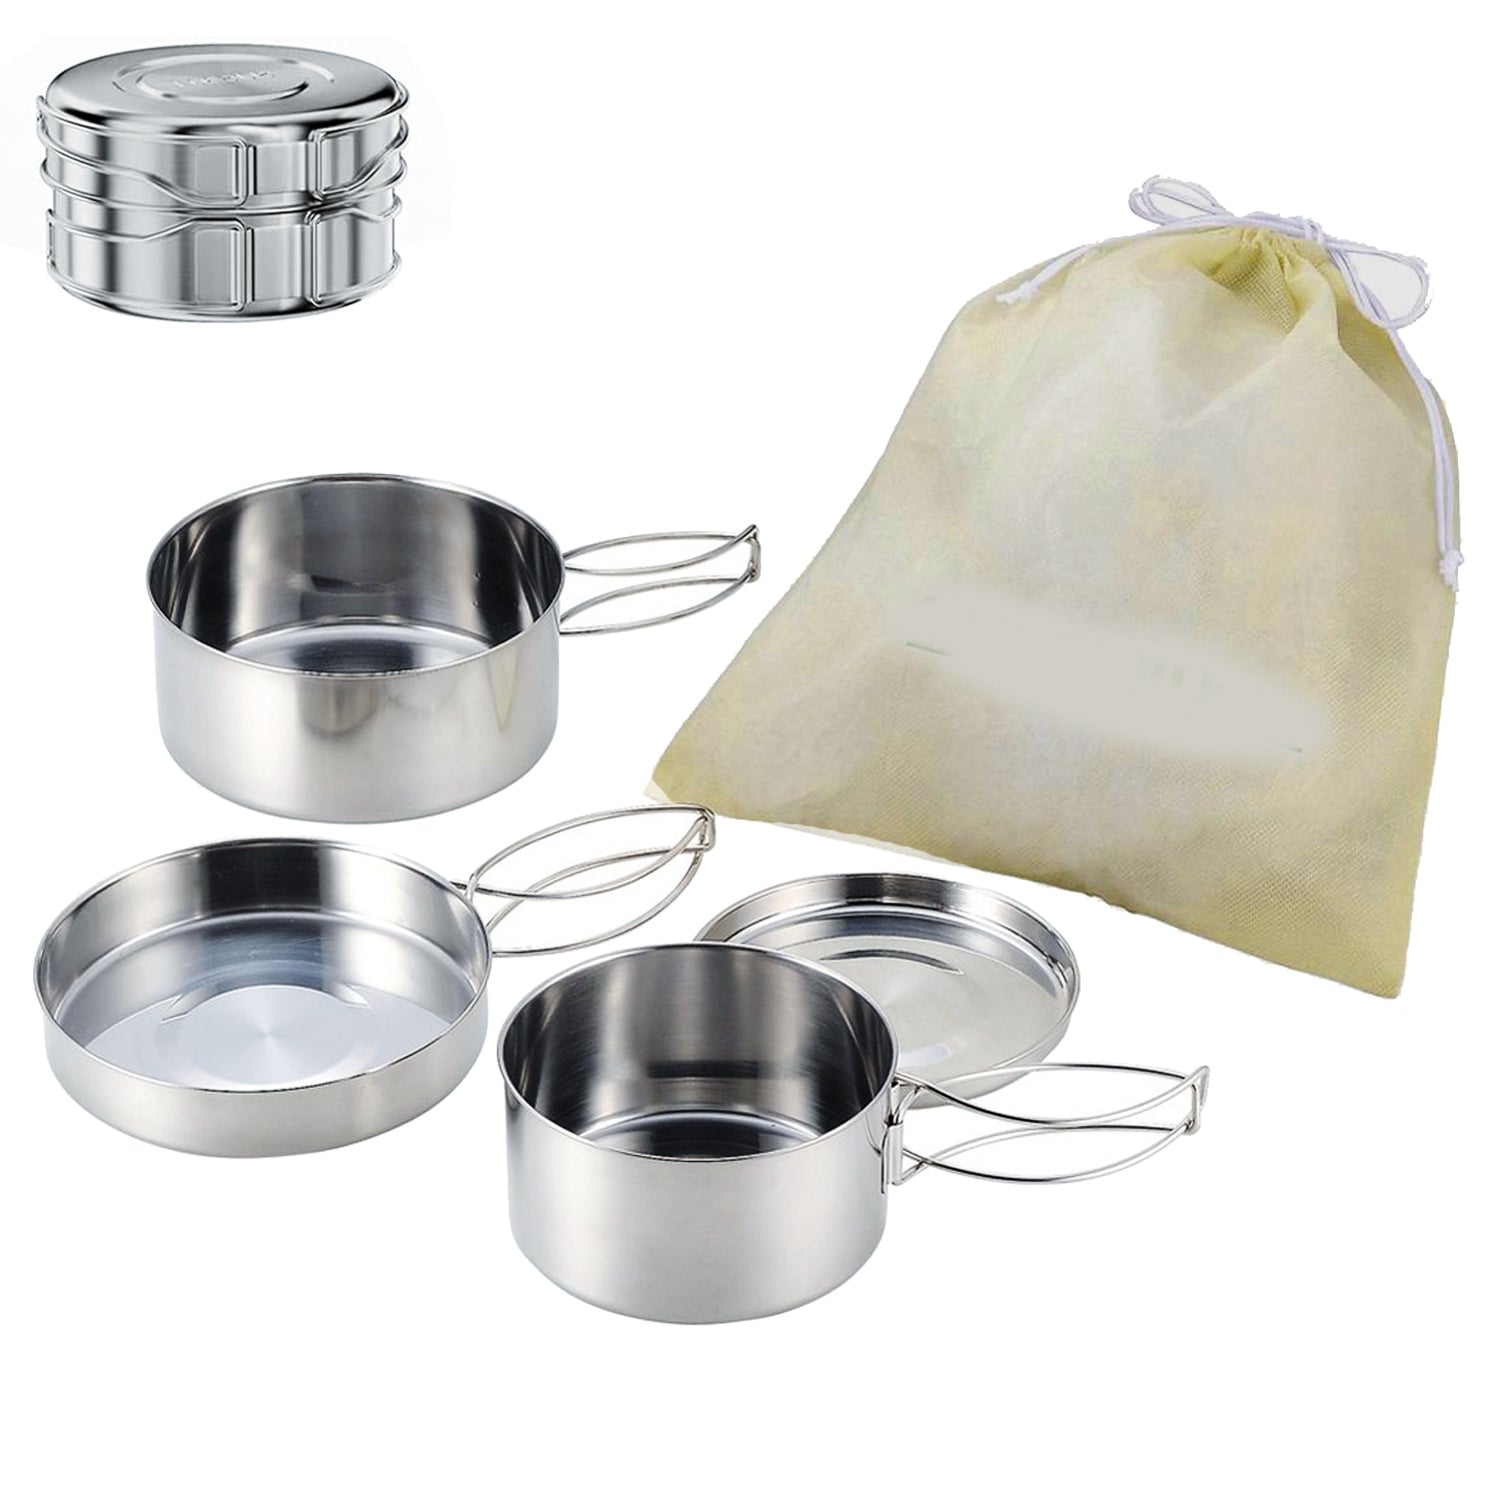 4 Piece Stackable Stainless Steel Camping Pots & Pans Set FX-9115-3